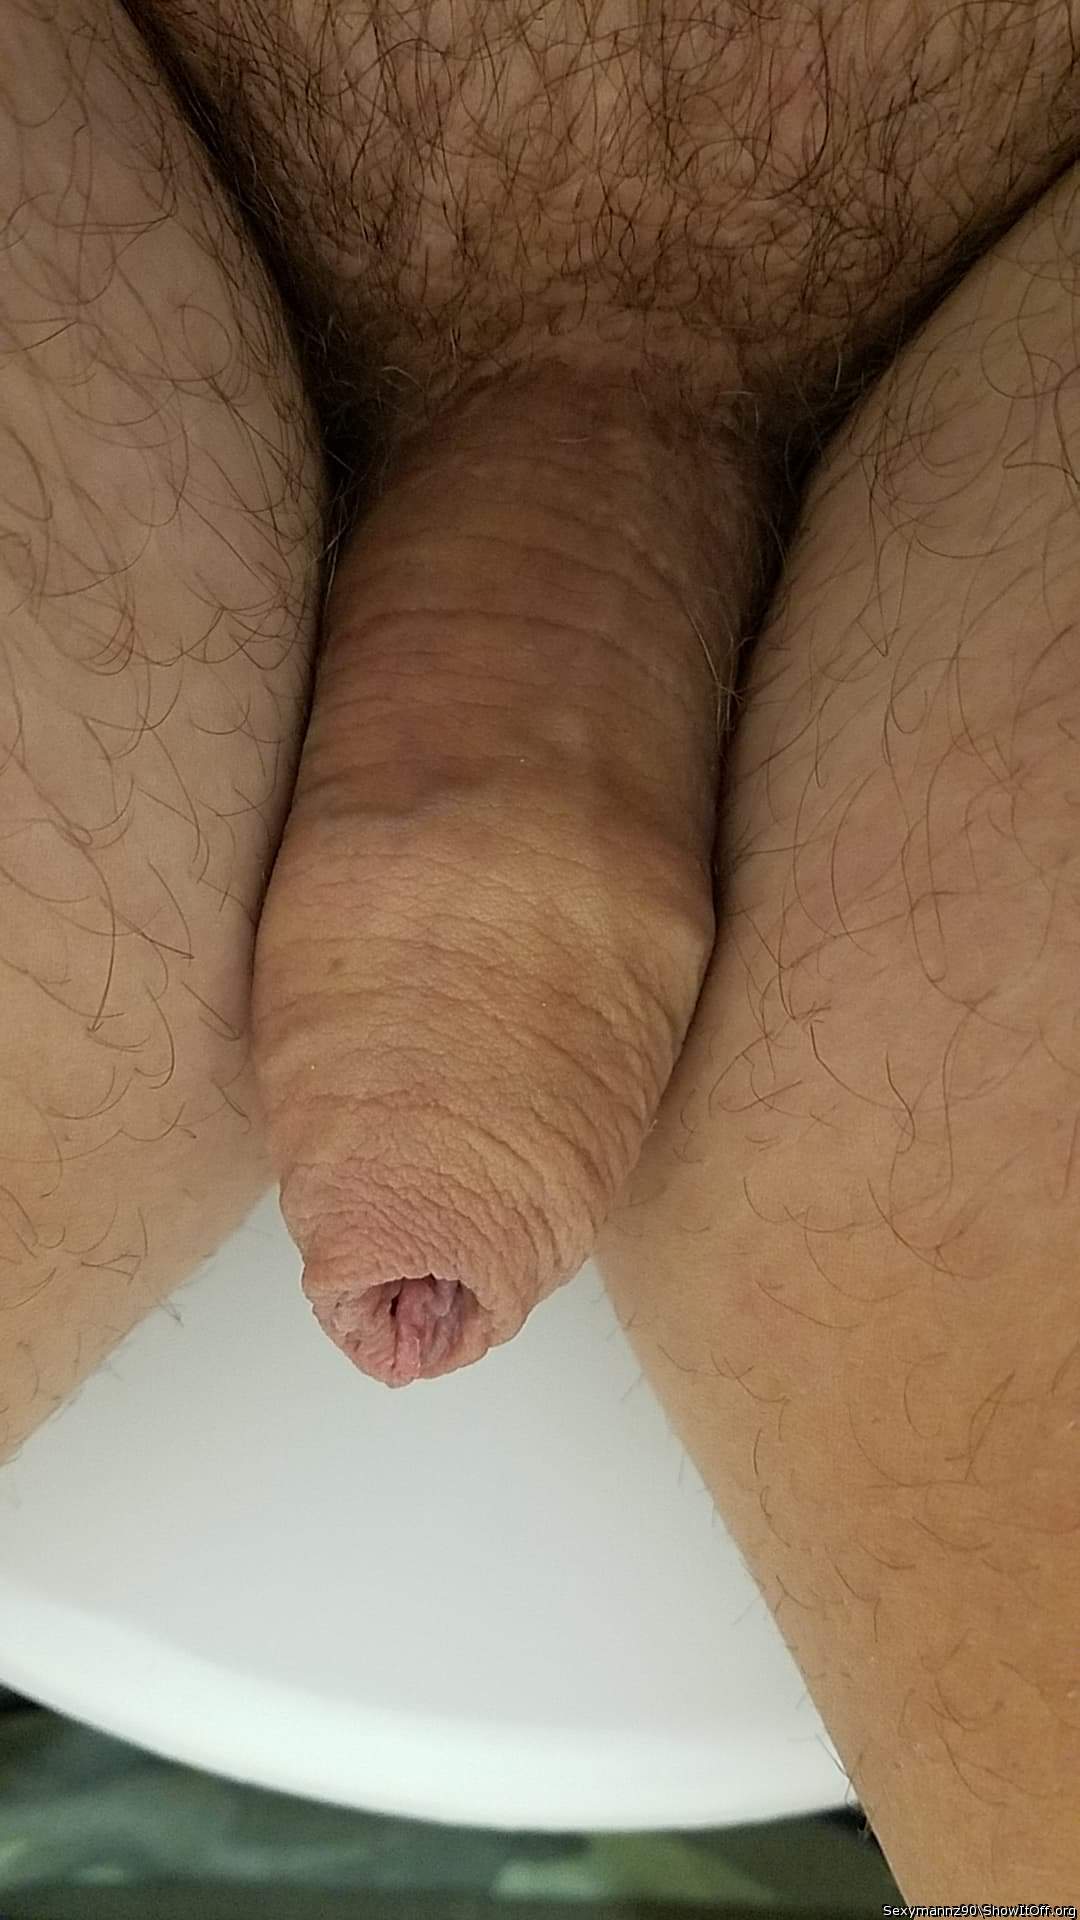 Perfect cock and fantastic foreskin! Thank you for showing y